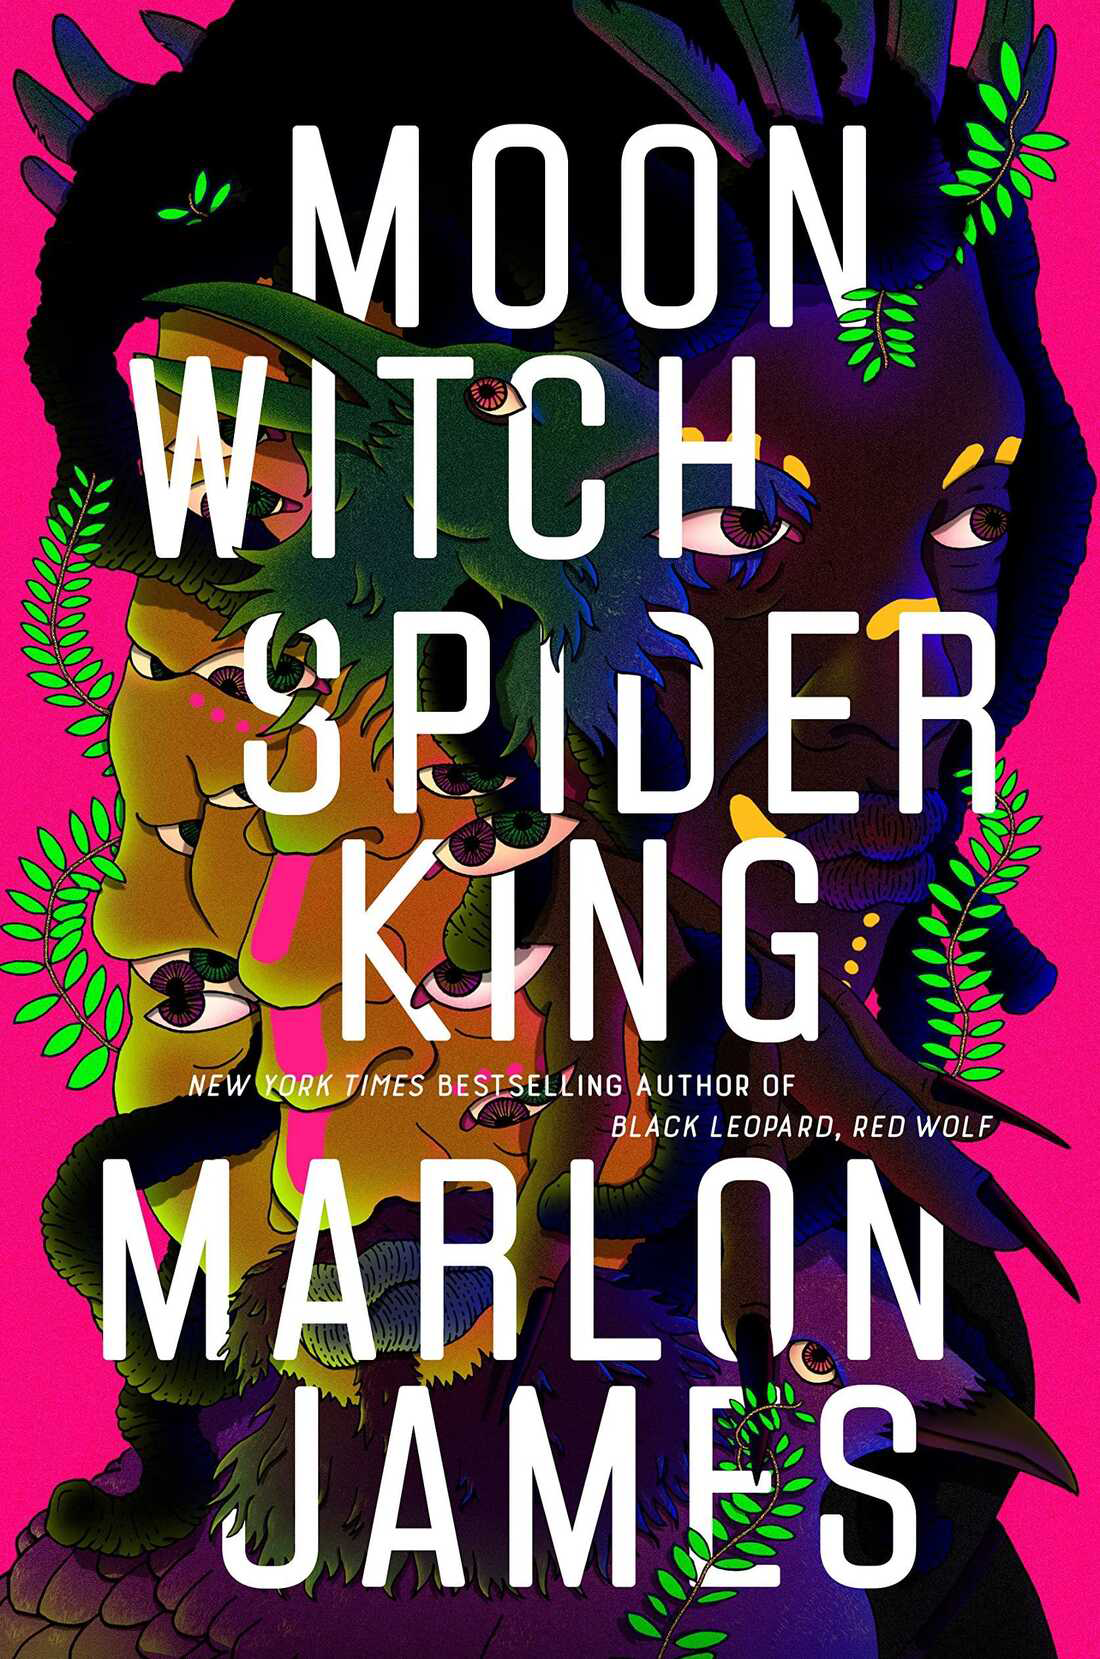 Marlon James: Moon Witch, Spider King